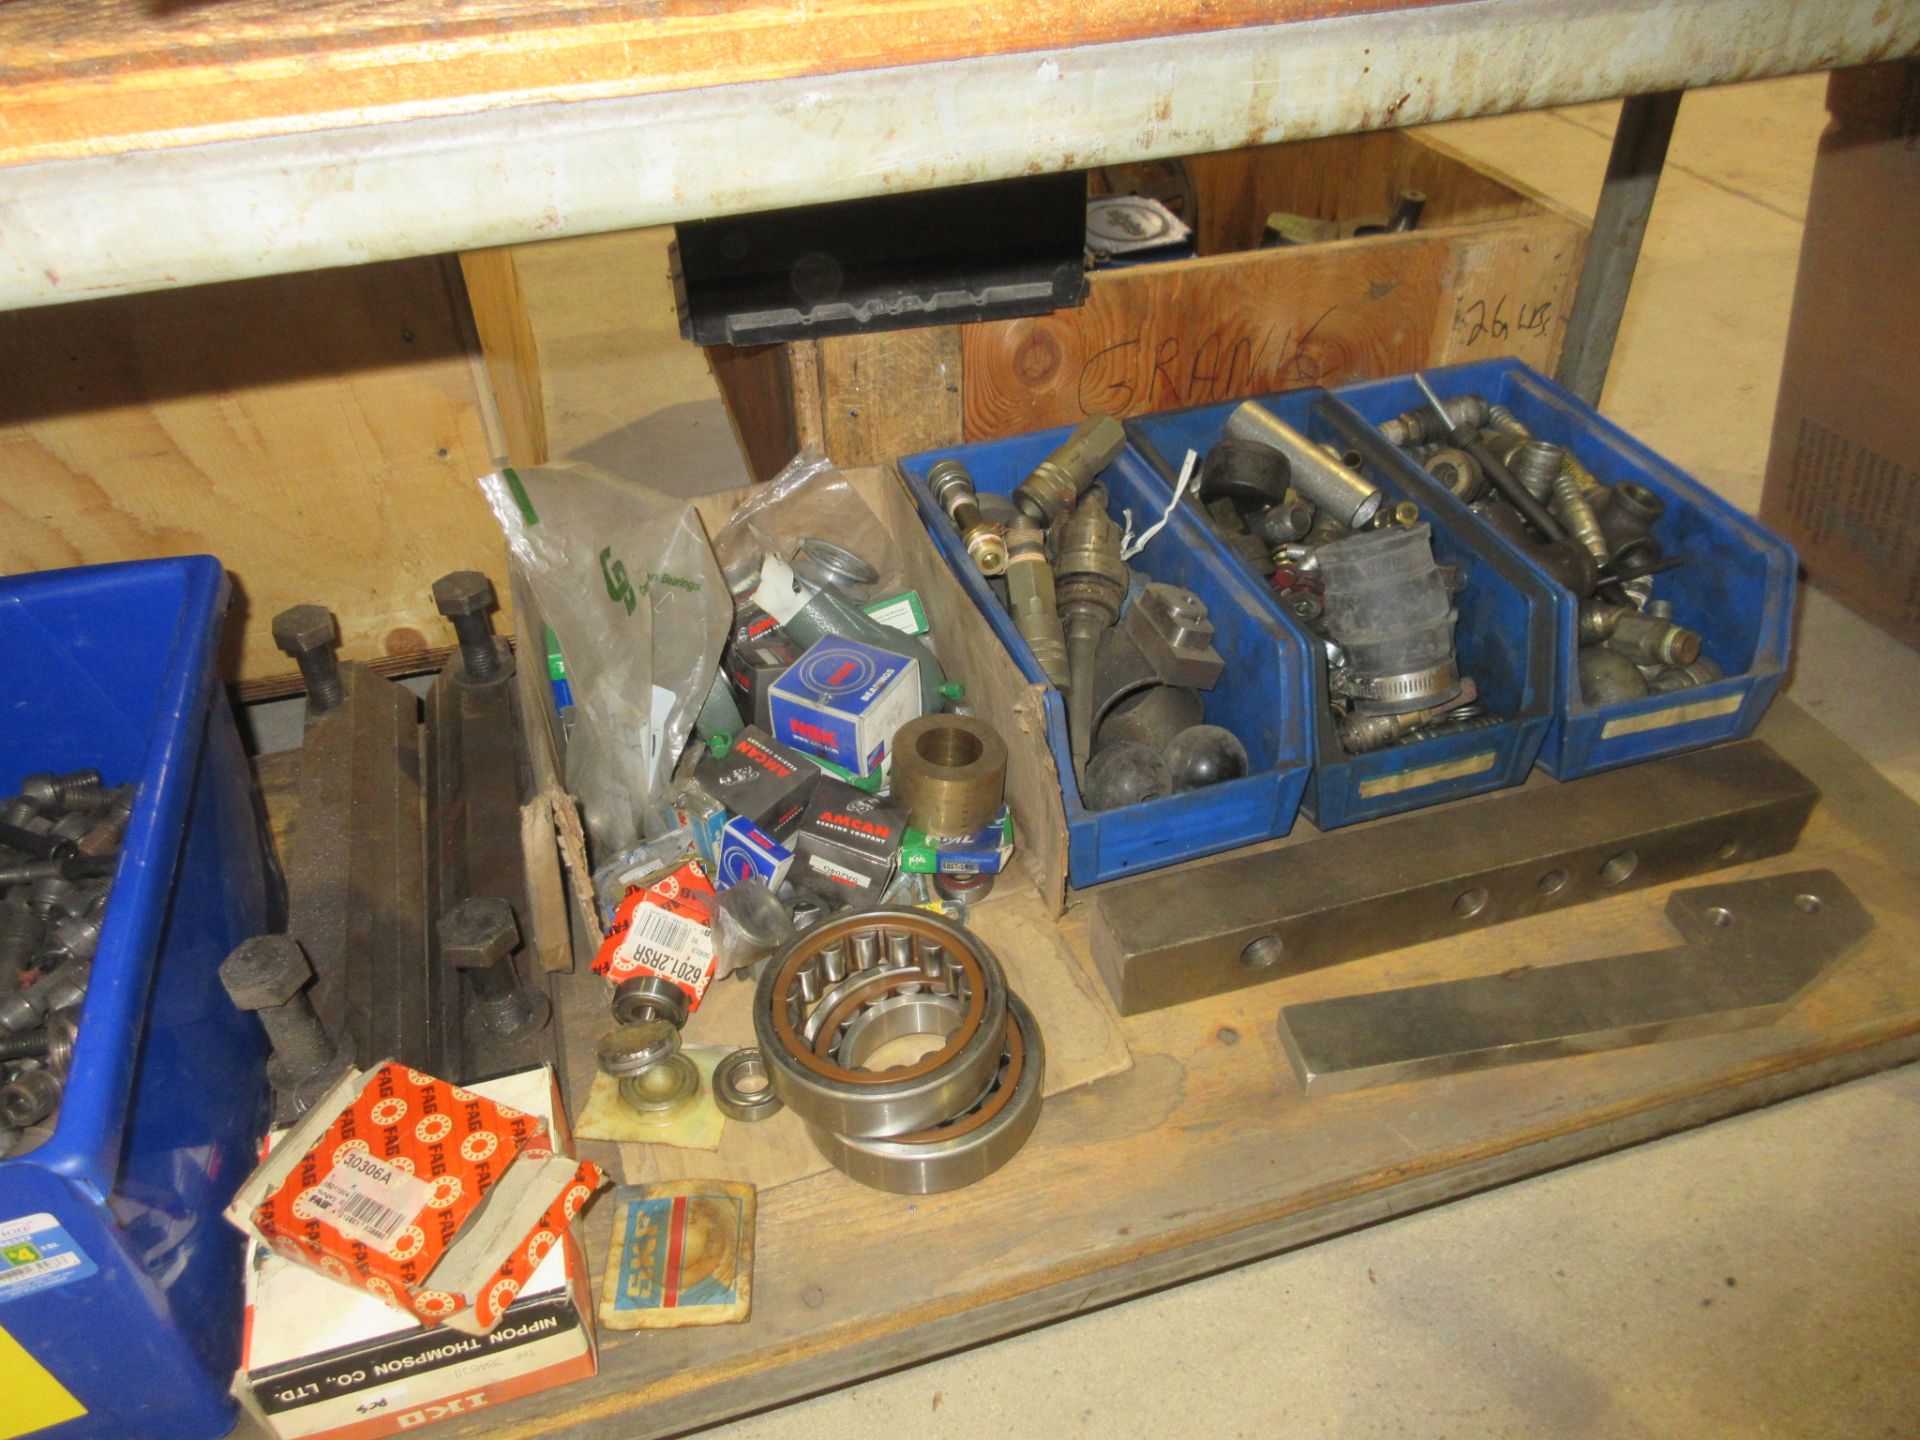 LOT OF (2) SHELVES CONTENTS INCLUDING BEARINGS, MACHINE SCREWS, ETC. AND CRATE W/ MOTOR - Image 5 of 6